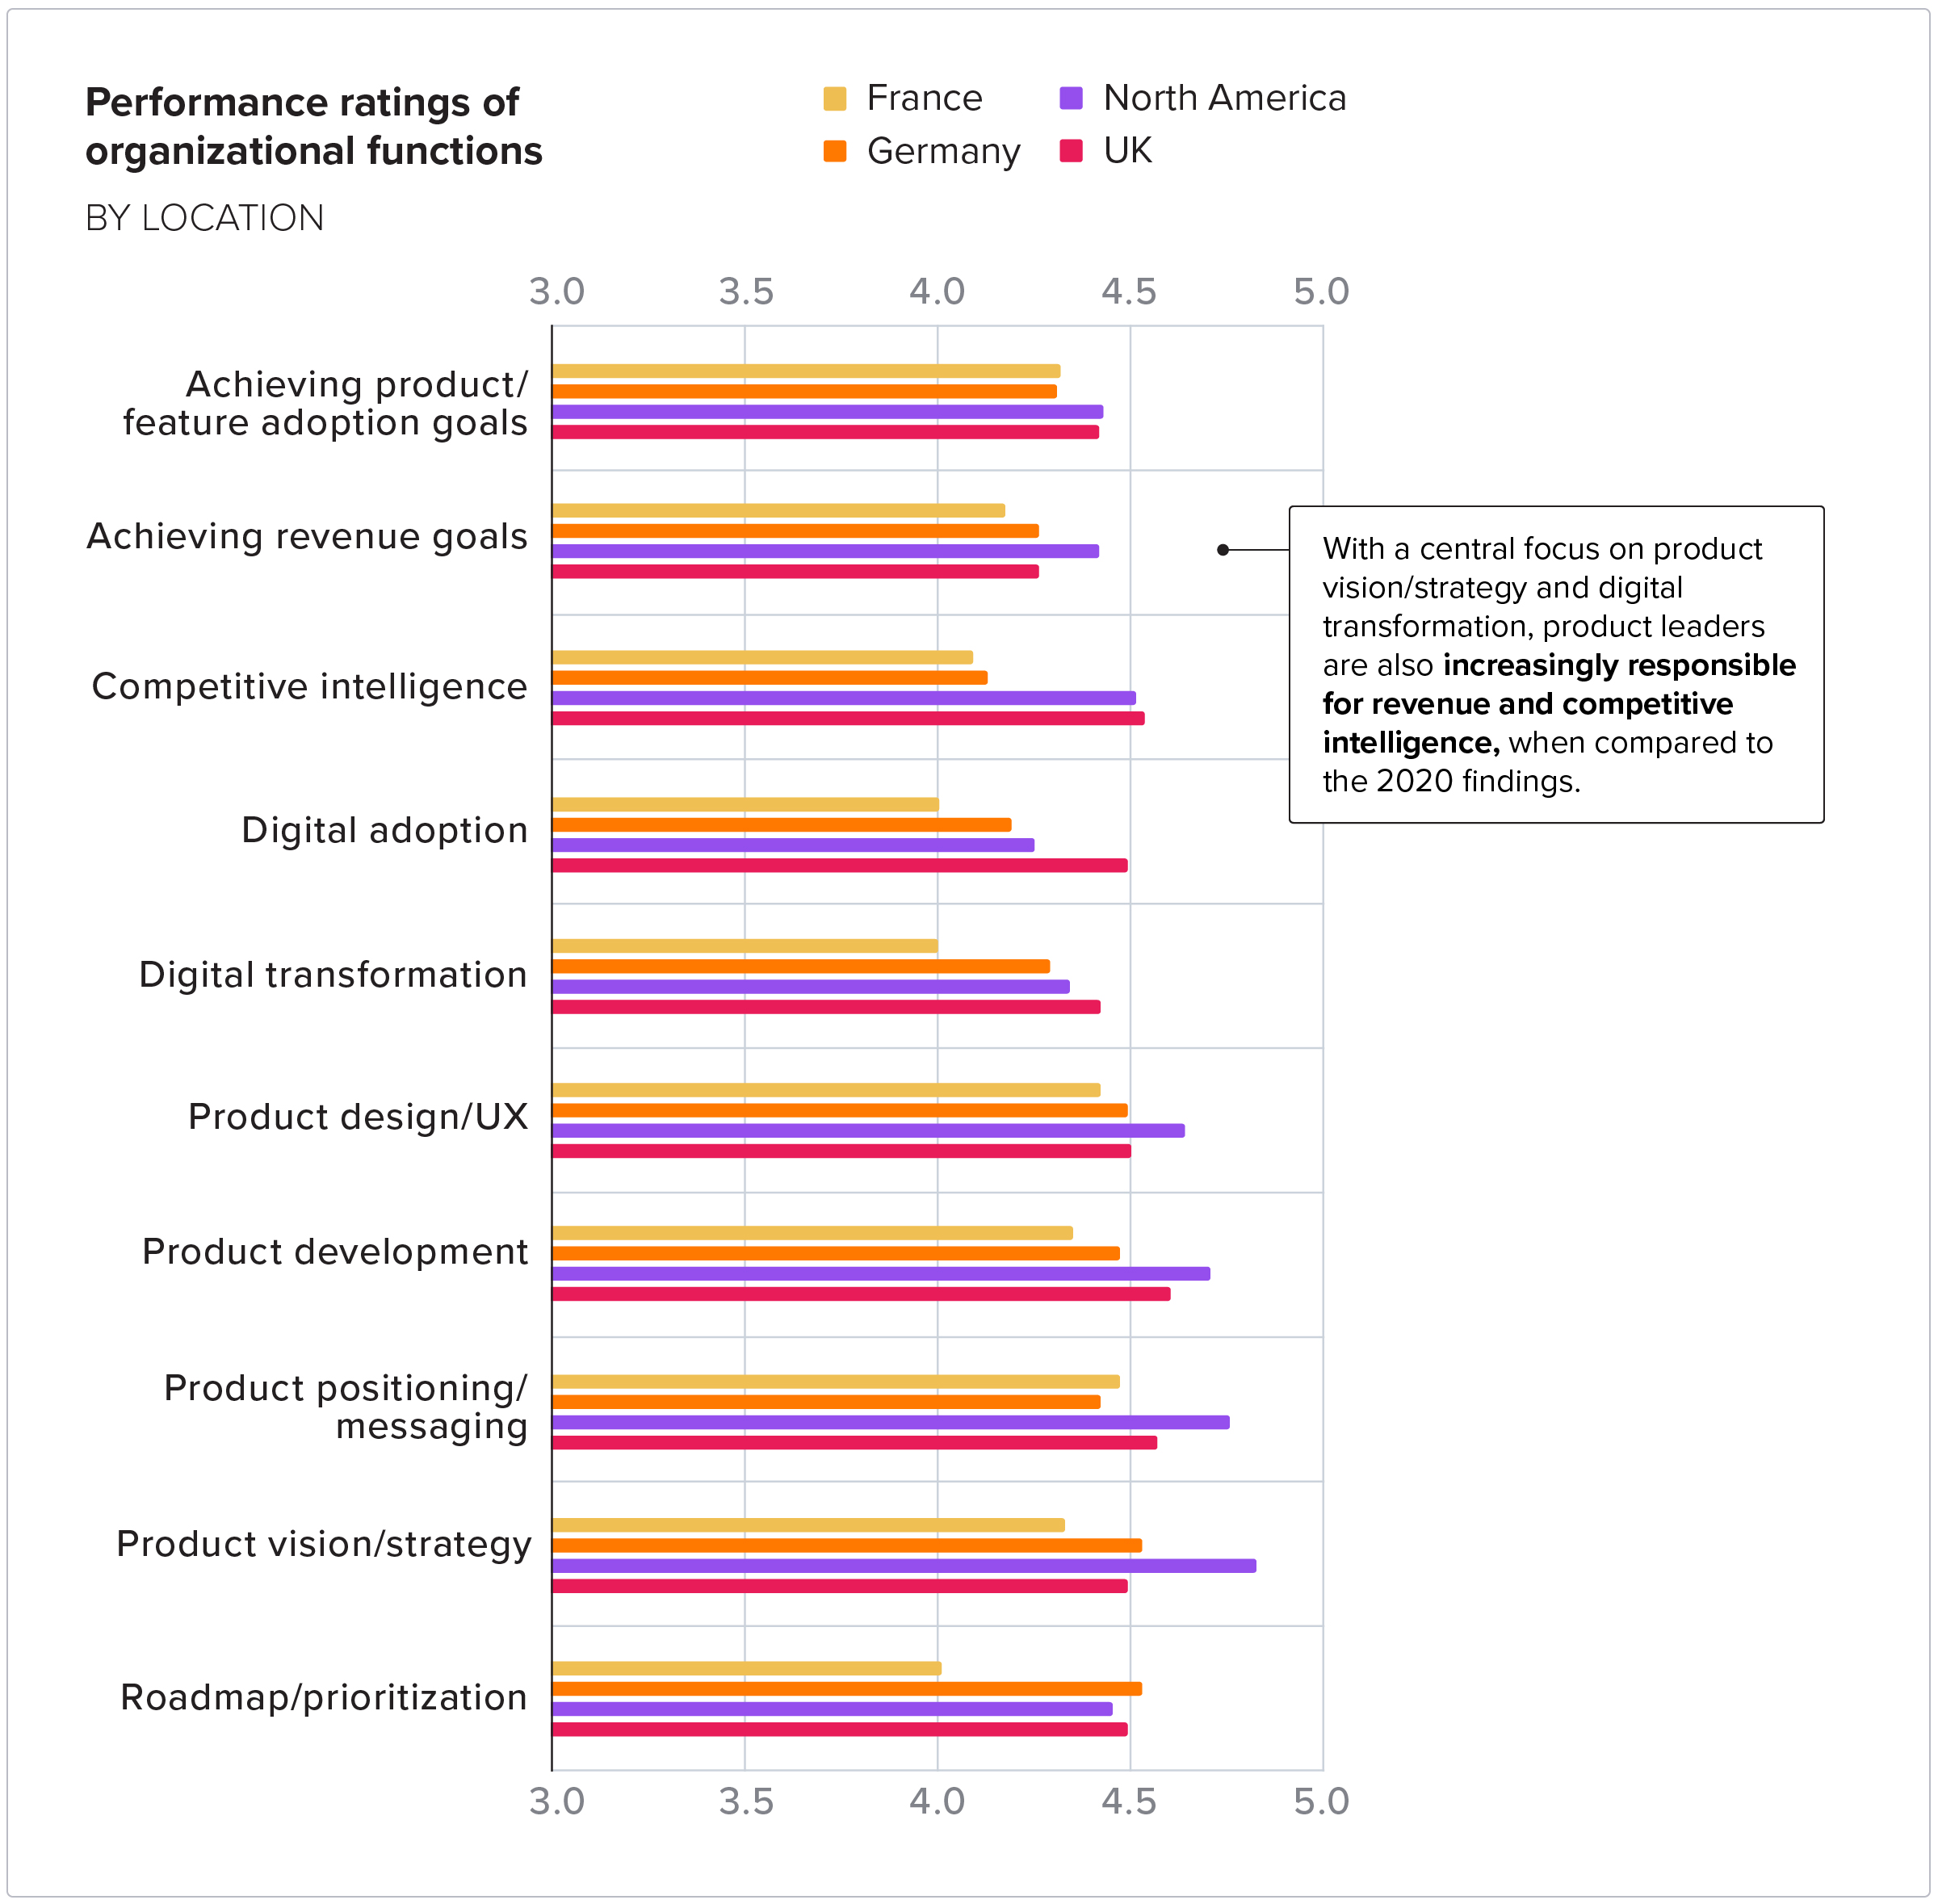 Performance ratings of organizational functions by location